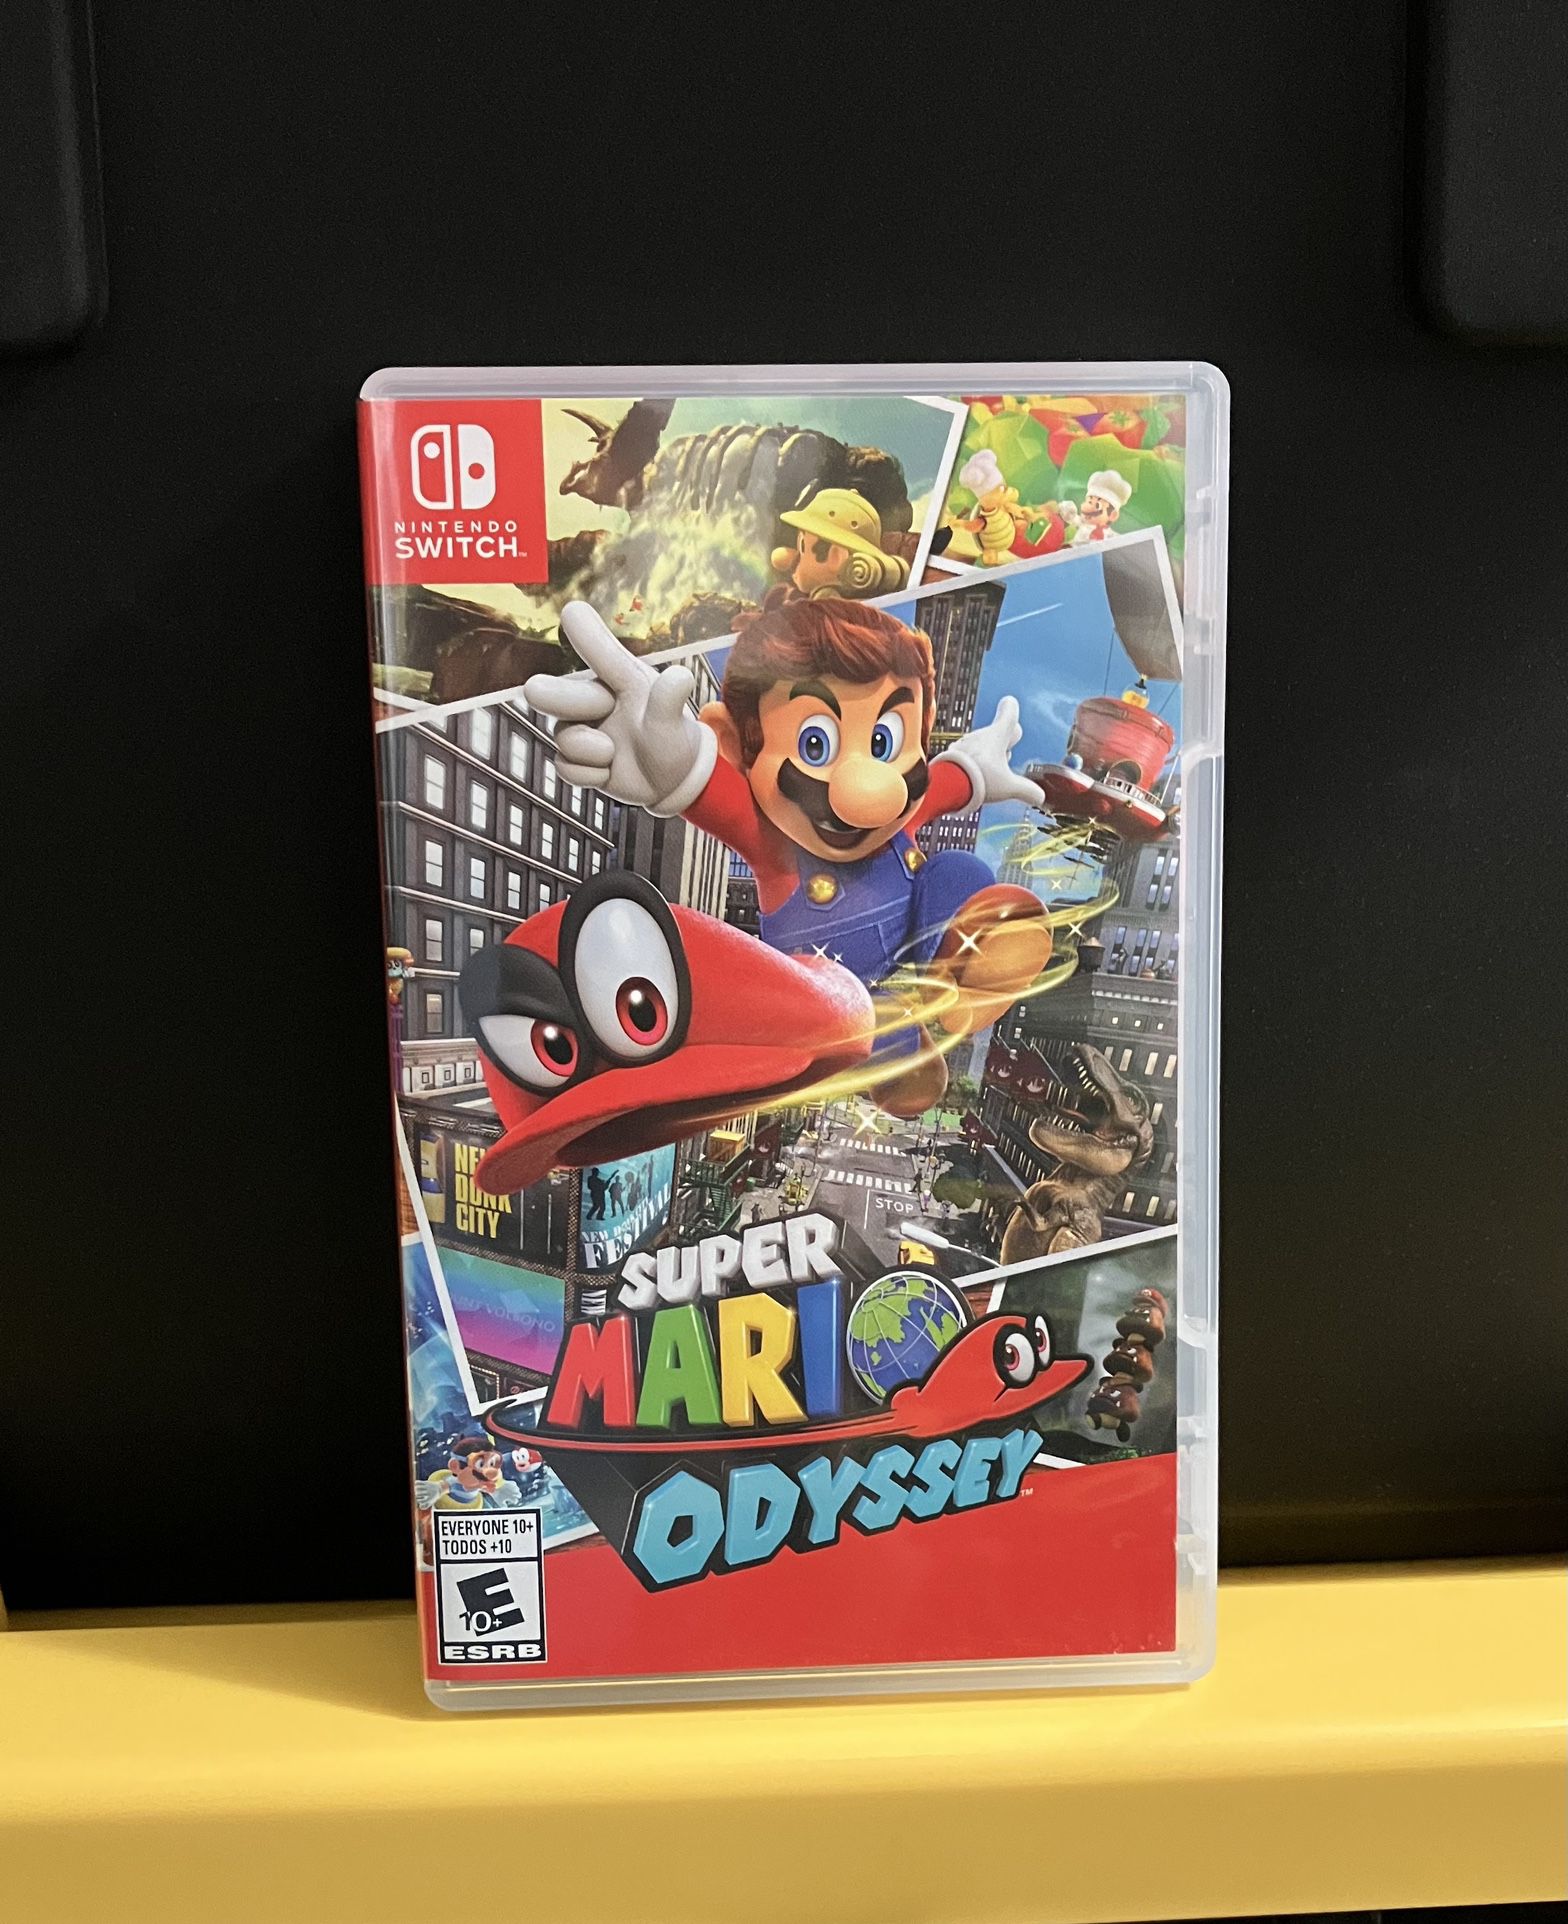 Super Mario Odyssey COMPLETE for Nintendo Switch system brothers bros Luigi lite or Oled Light